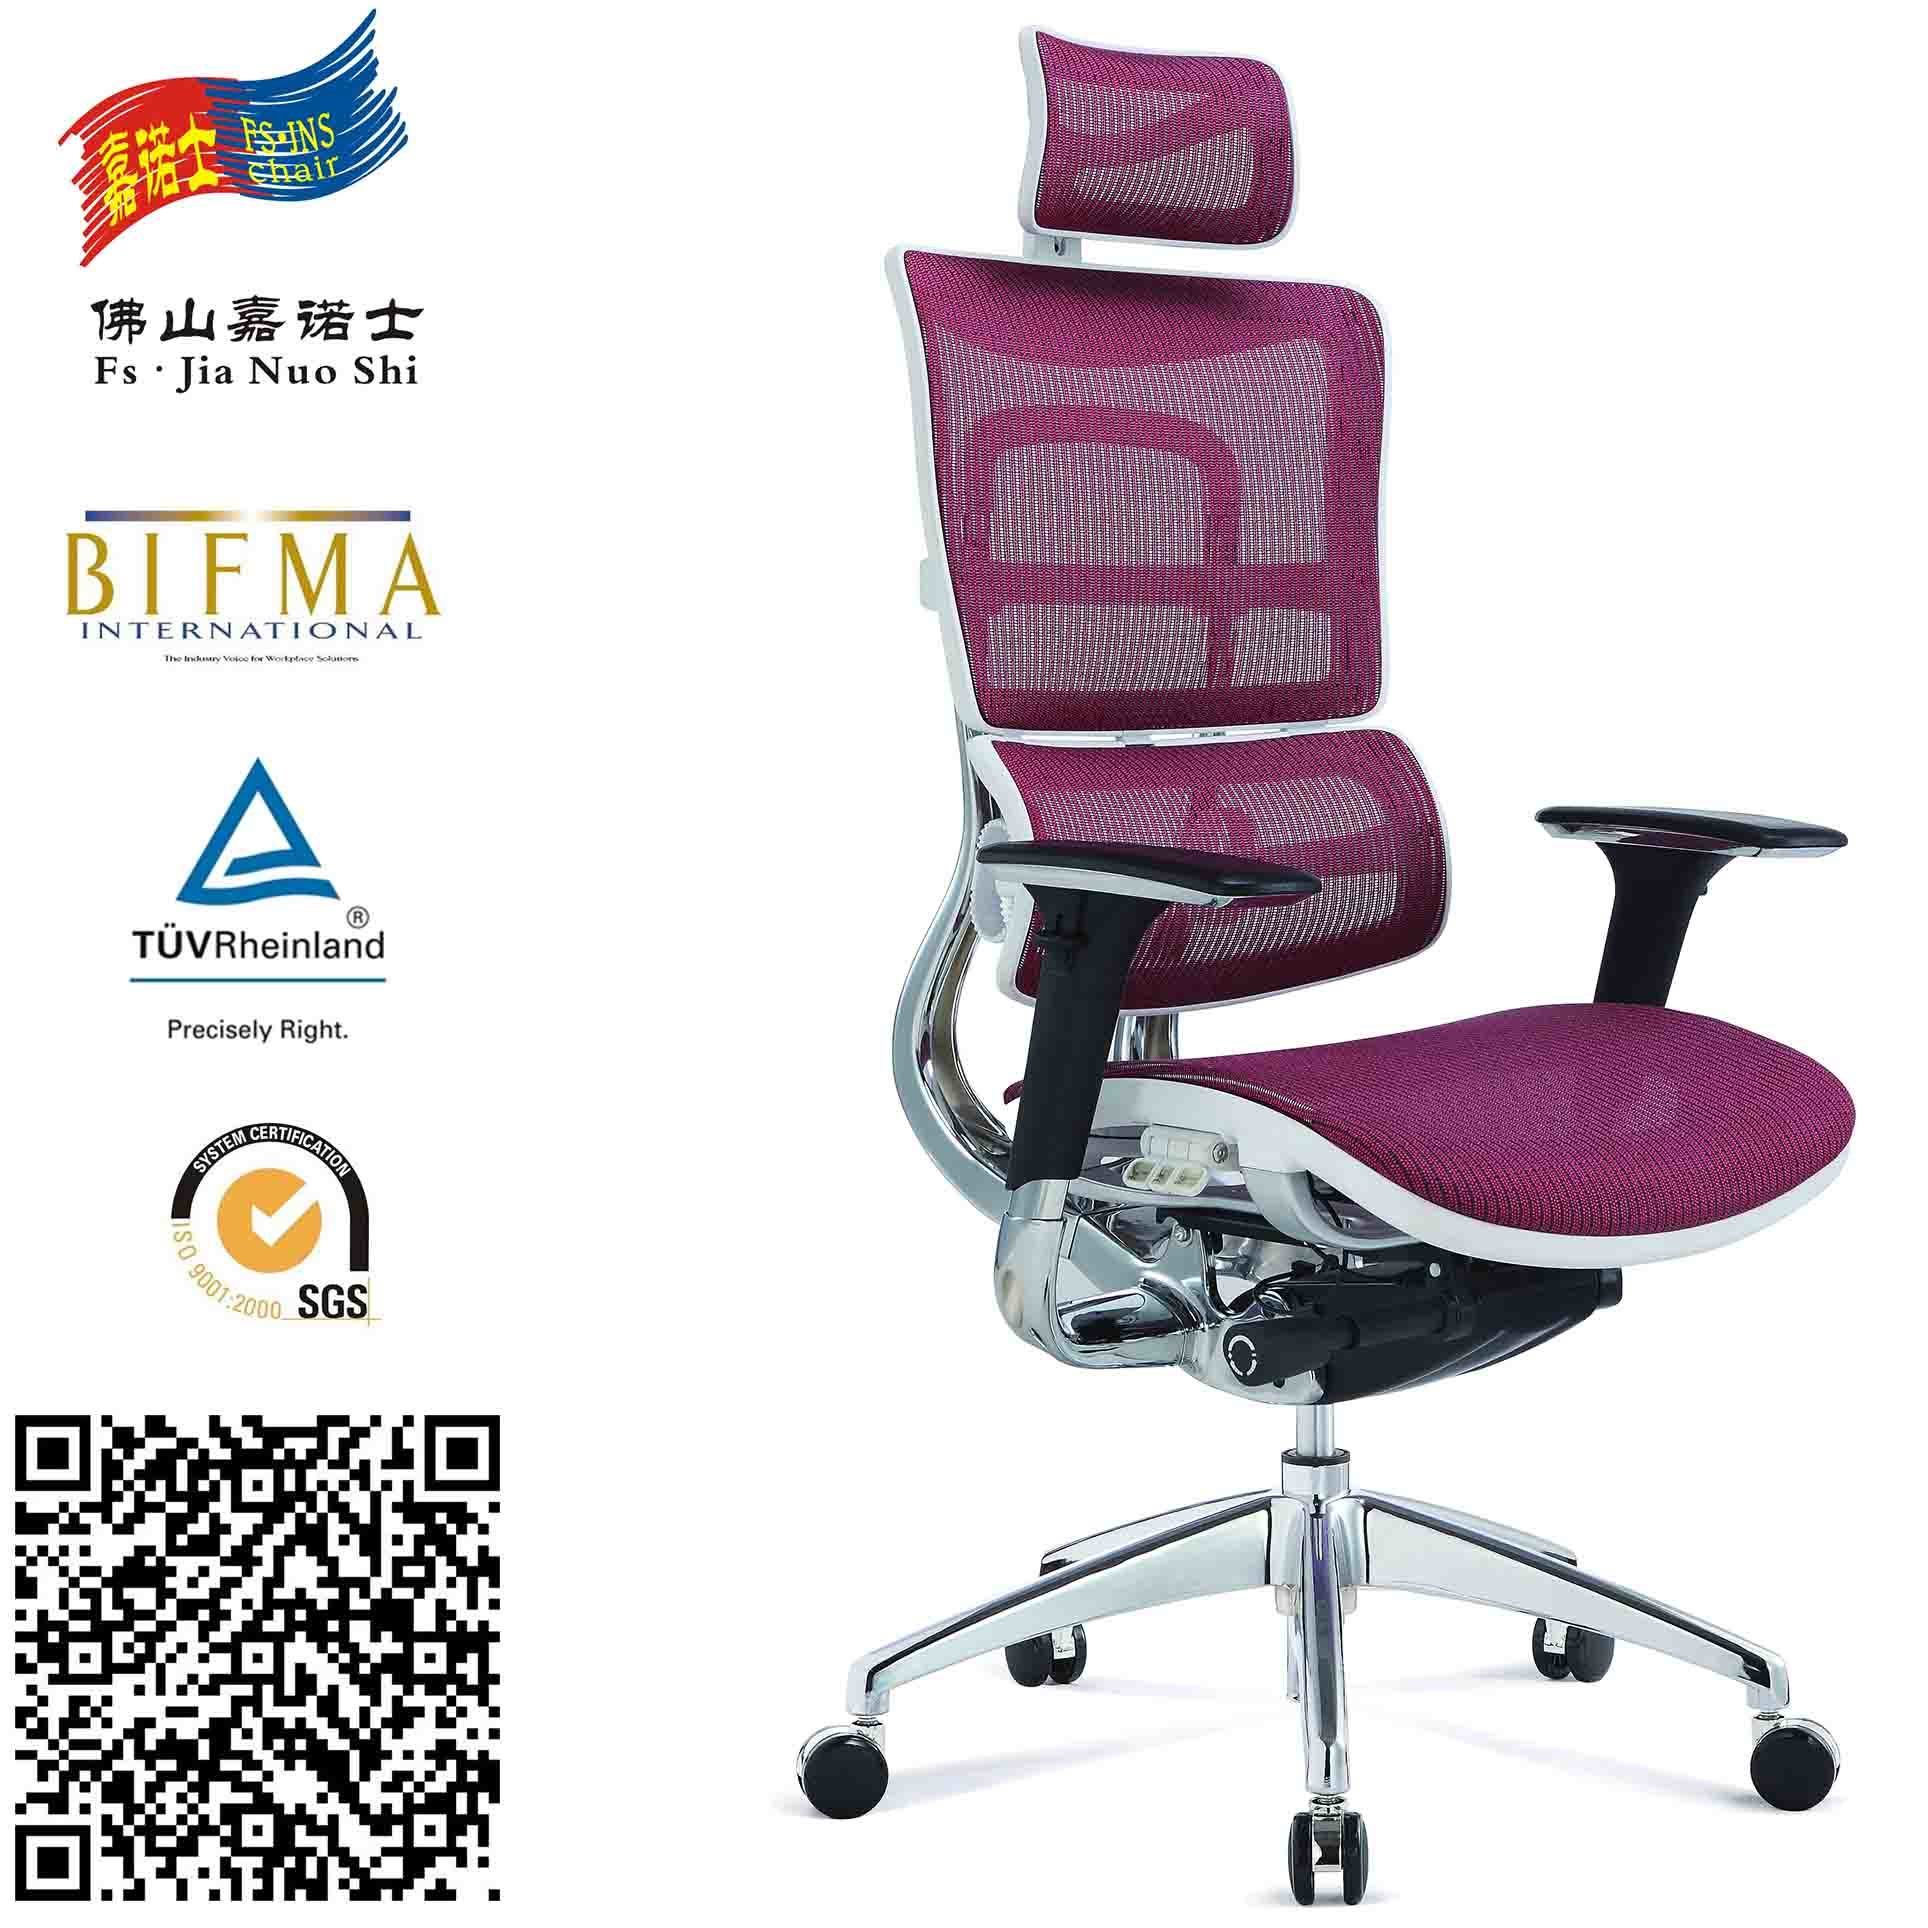 Ergonomic Office Chair with 3 Adjustments Levers